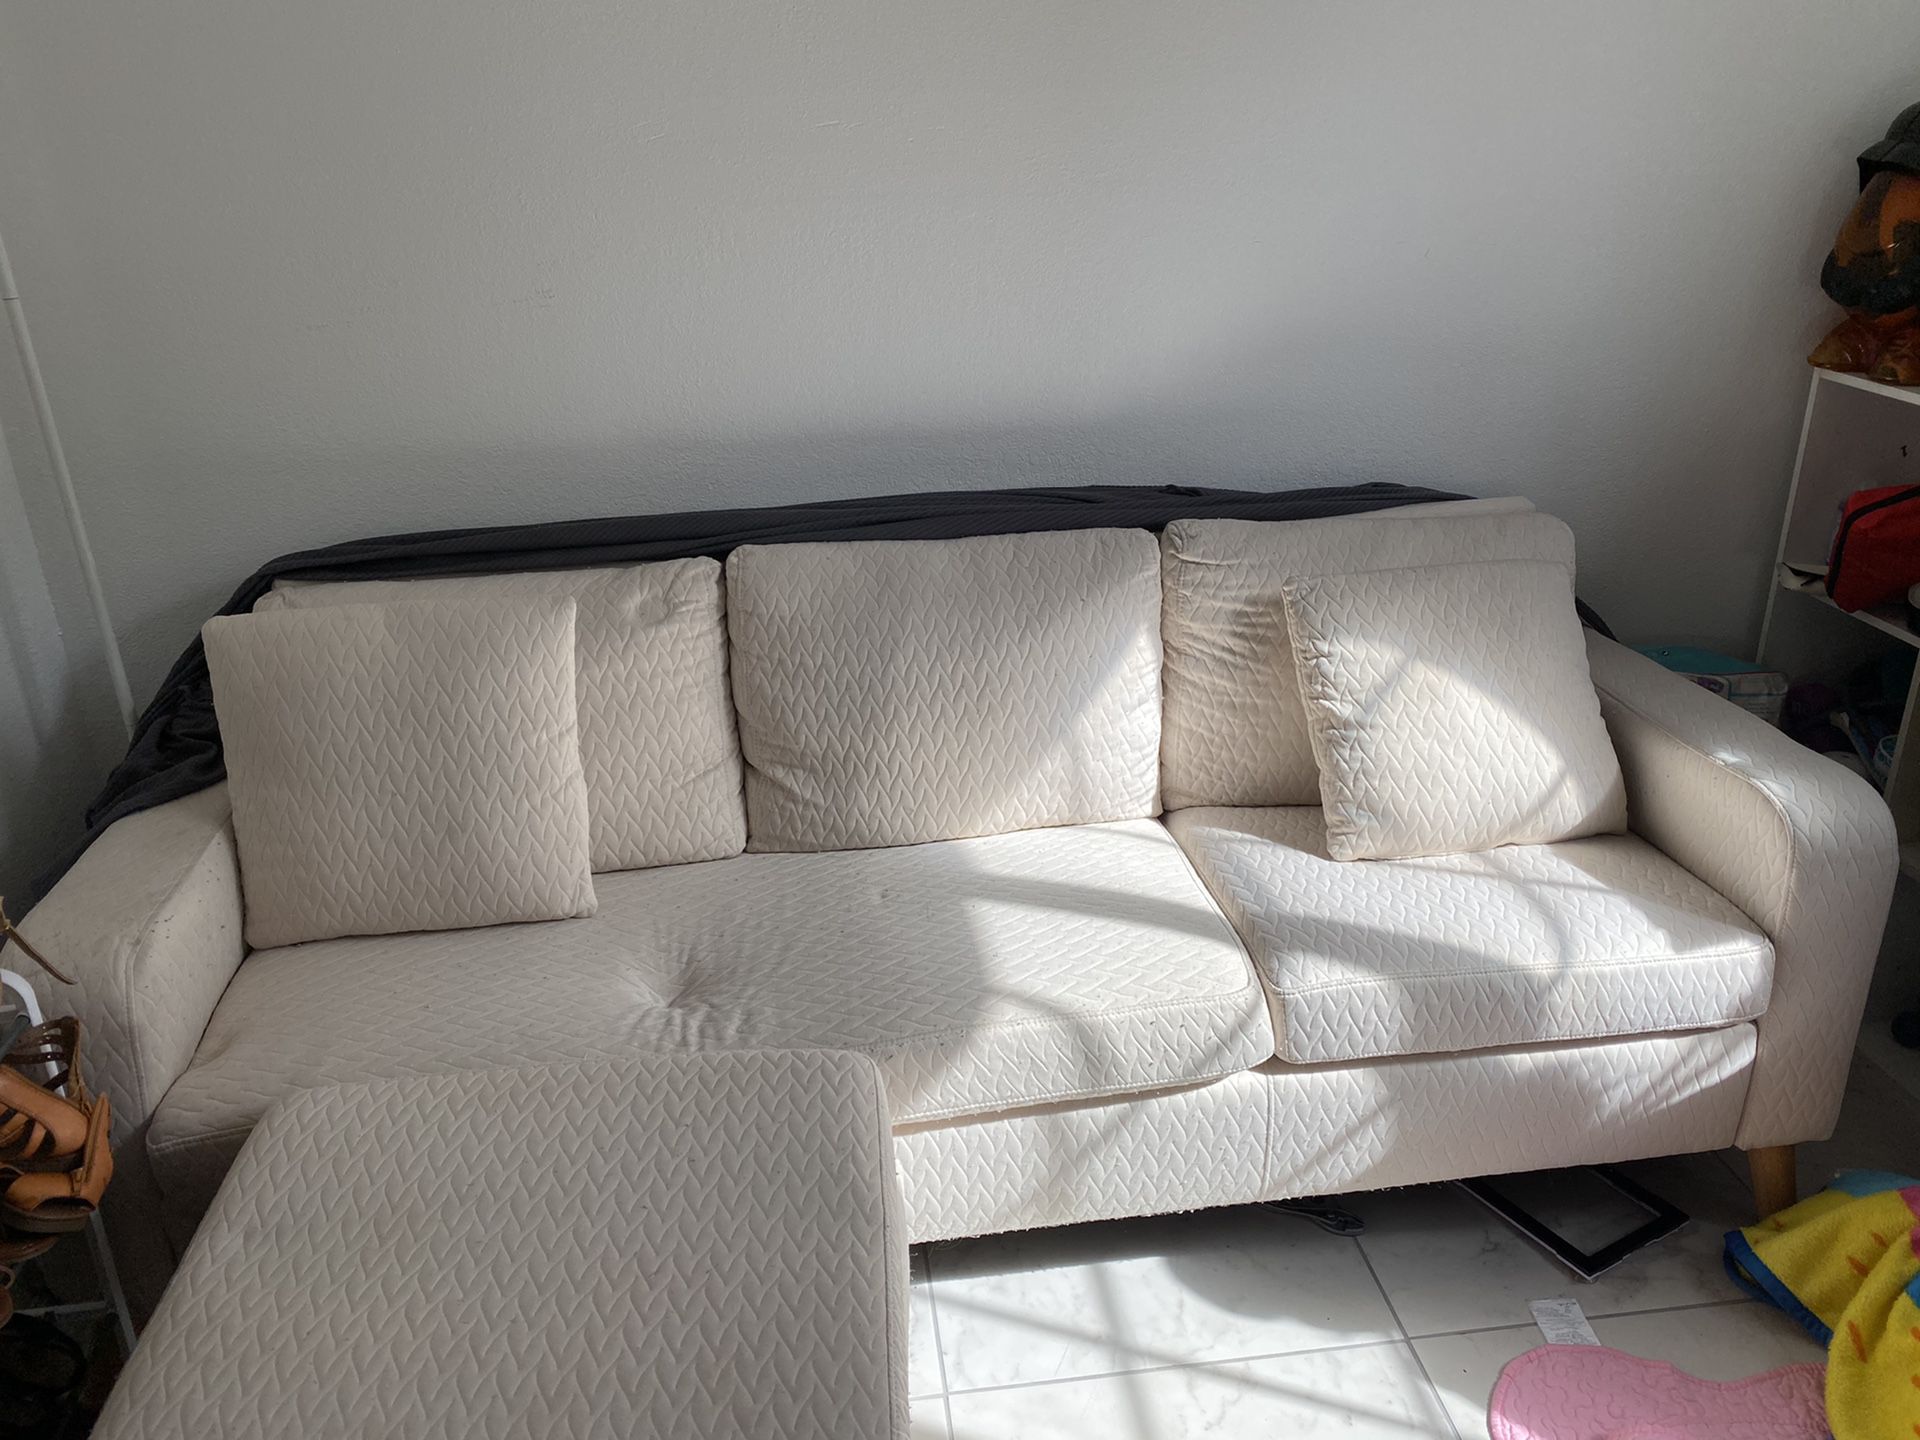 Small couch